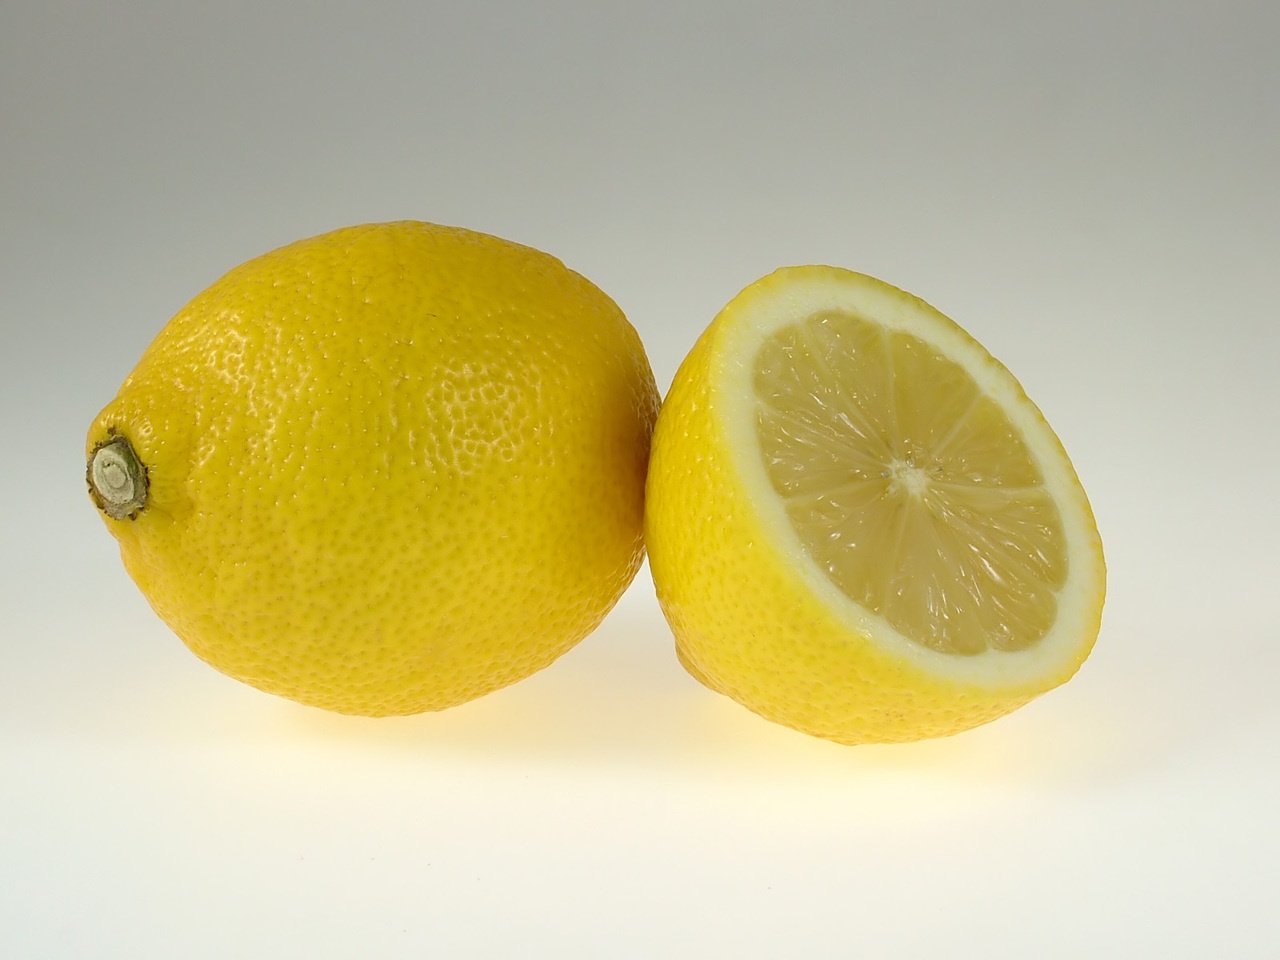 Avoid turning the people in your images into Lemon Heads